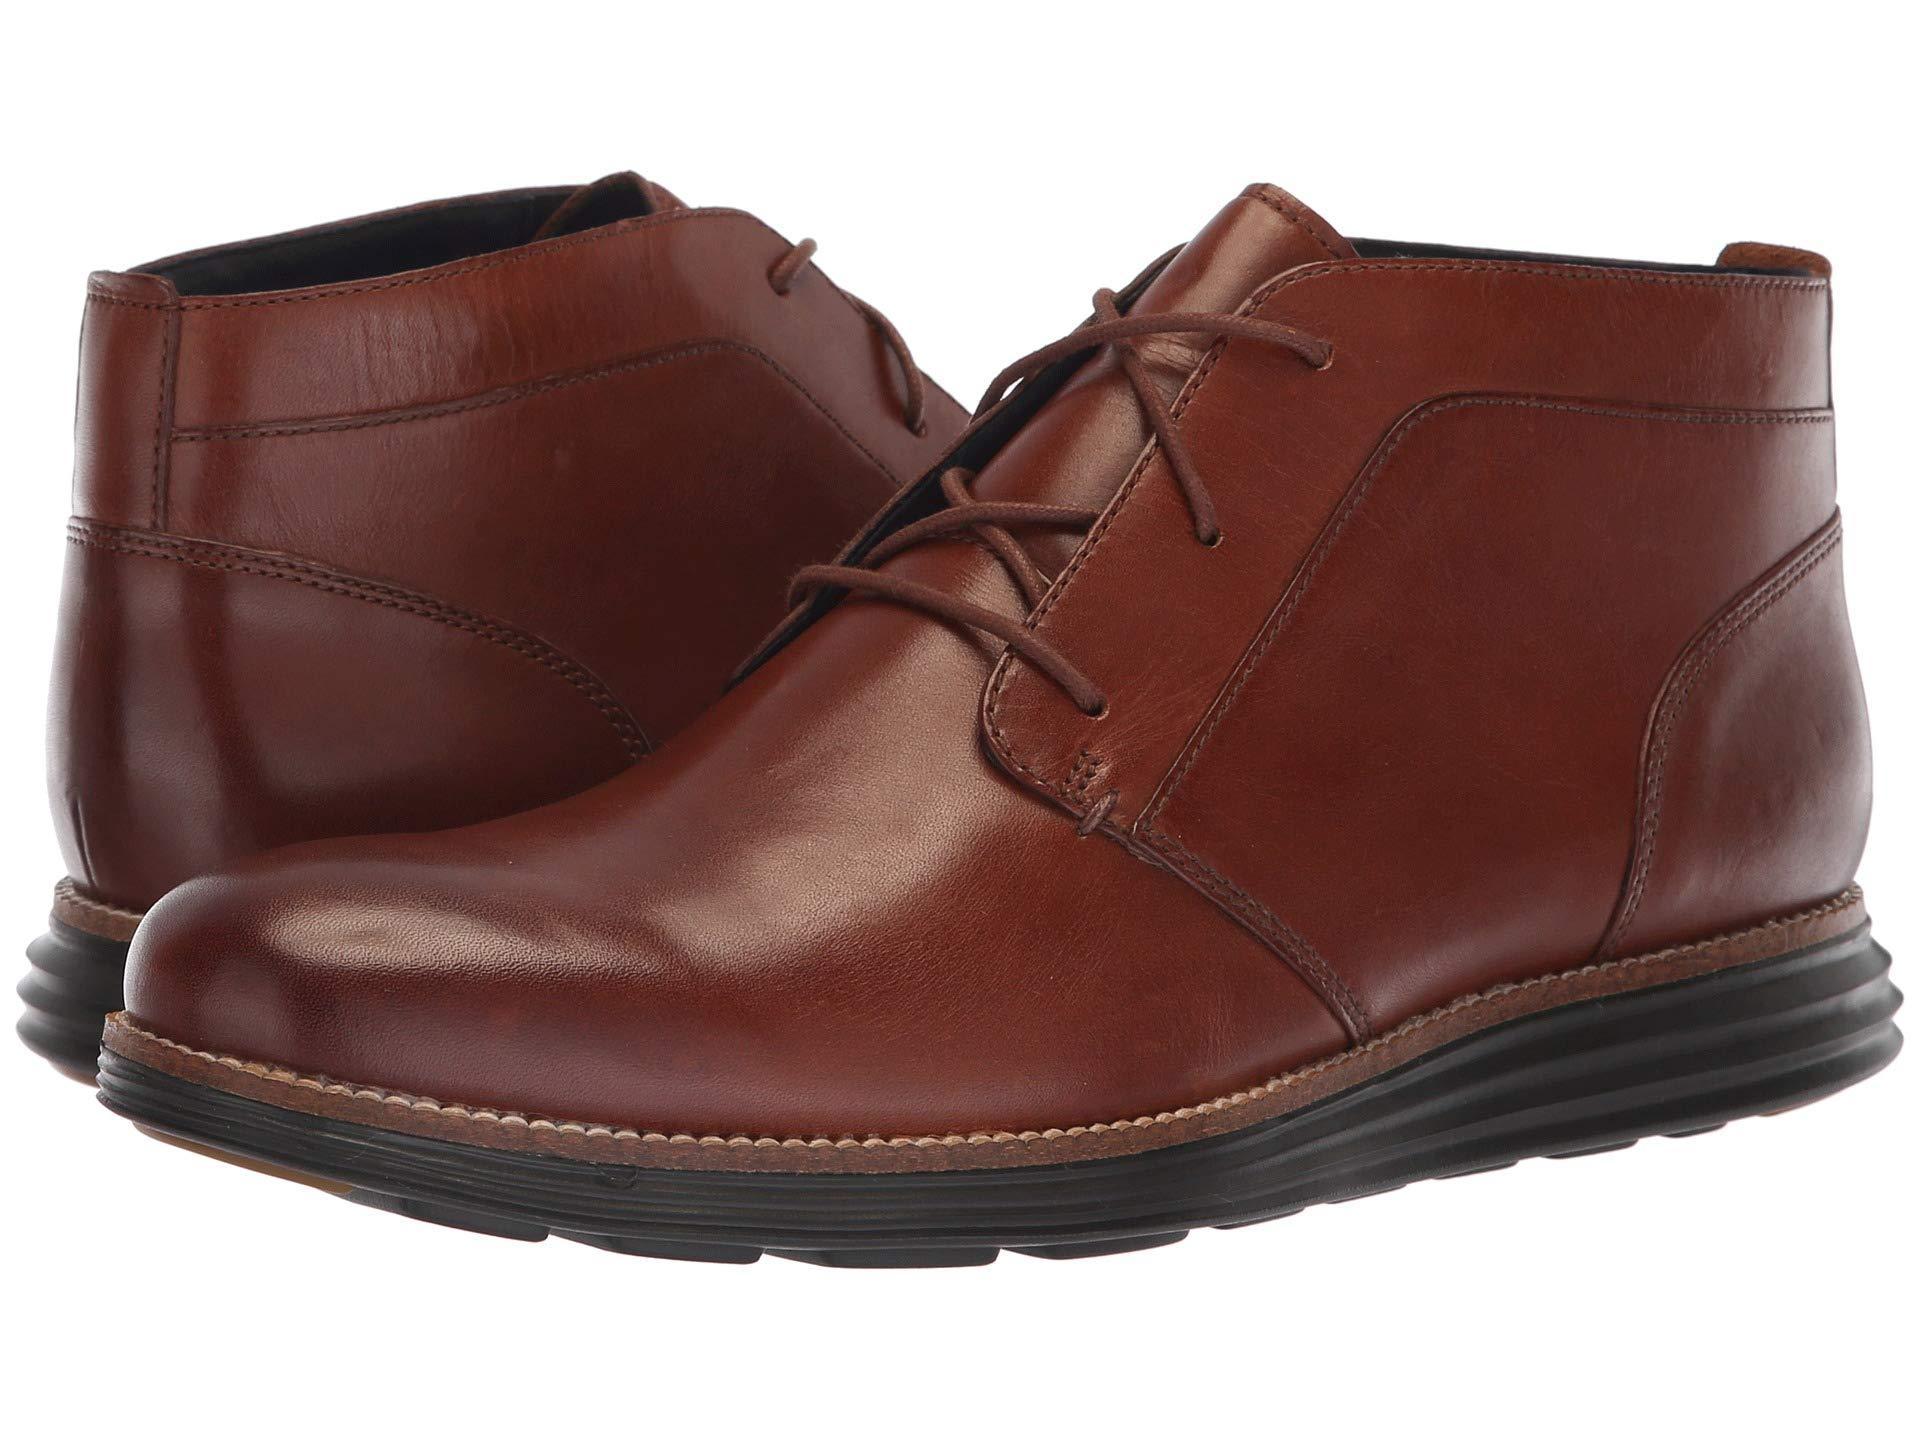 Cole Haan Leather Original Grand Chukka in Brown for Men - Save 51% - Lyst